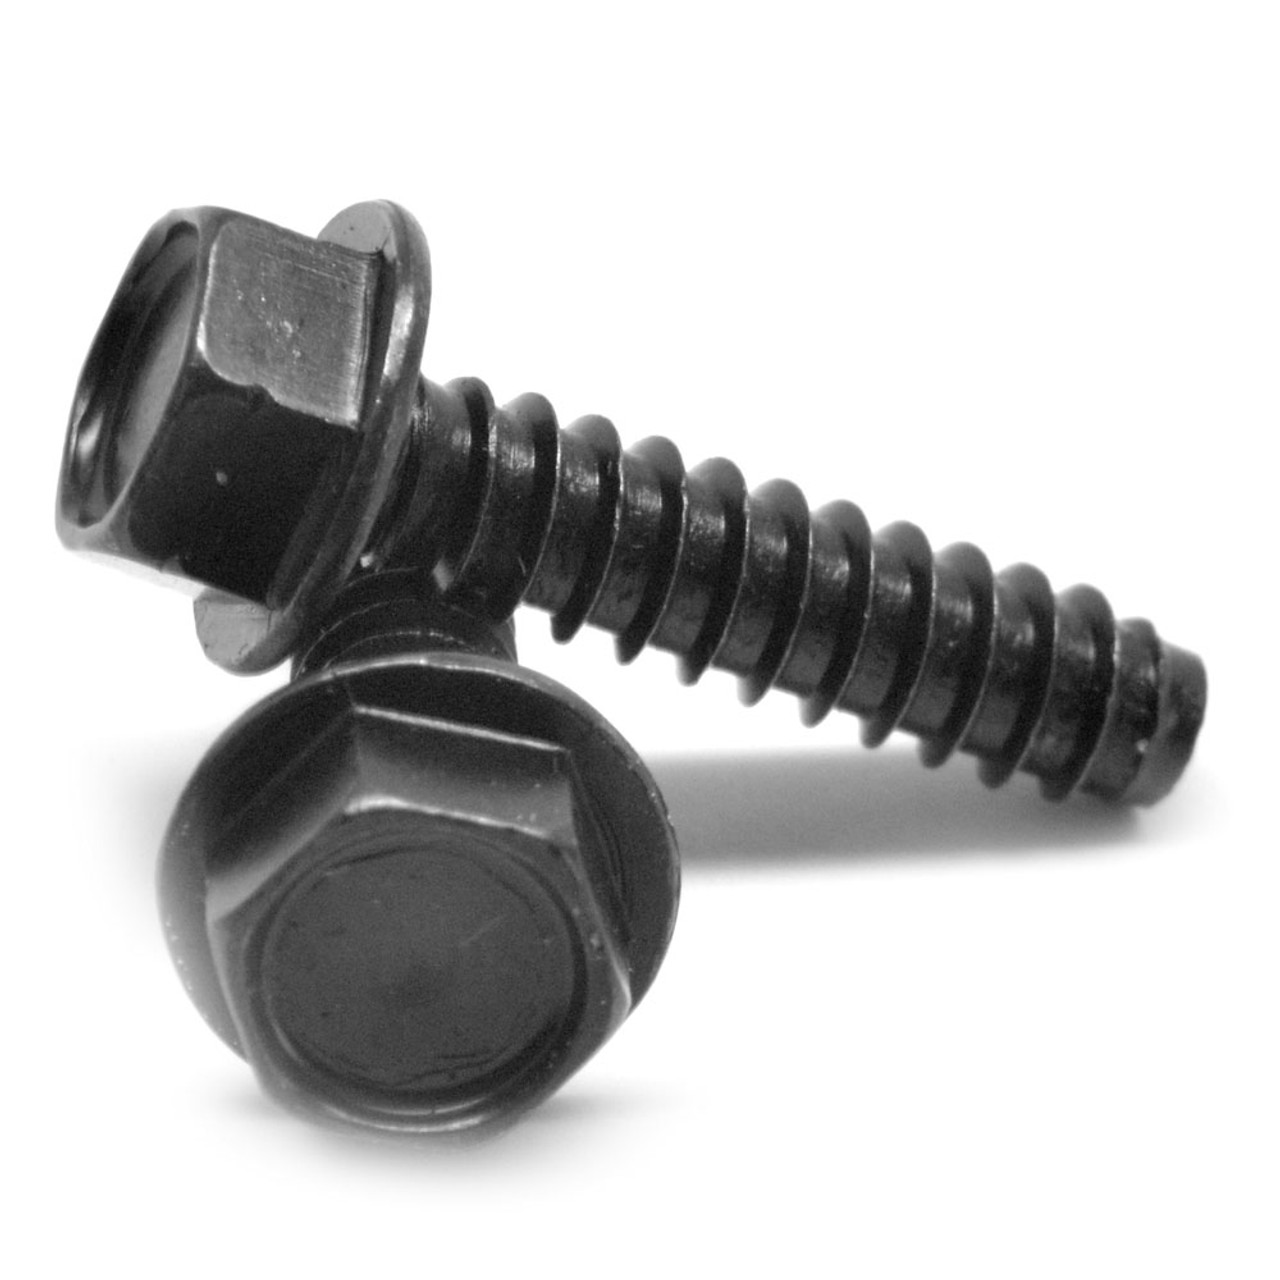 #8 x 3/8 Sheet Metal Screw Slotted Hex Washer Head Type AB Black Oxide 